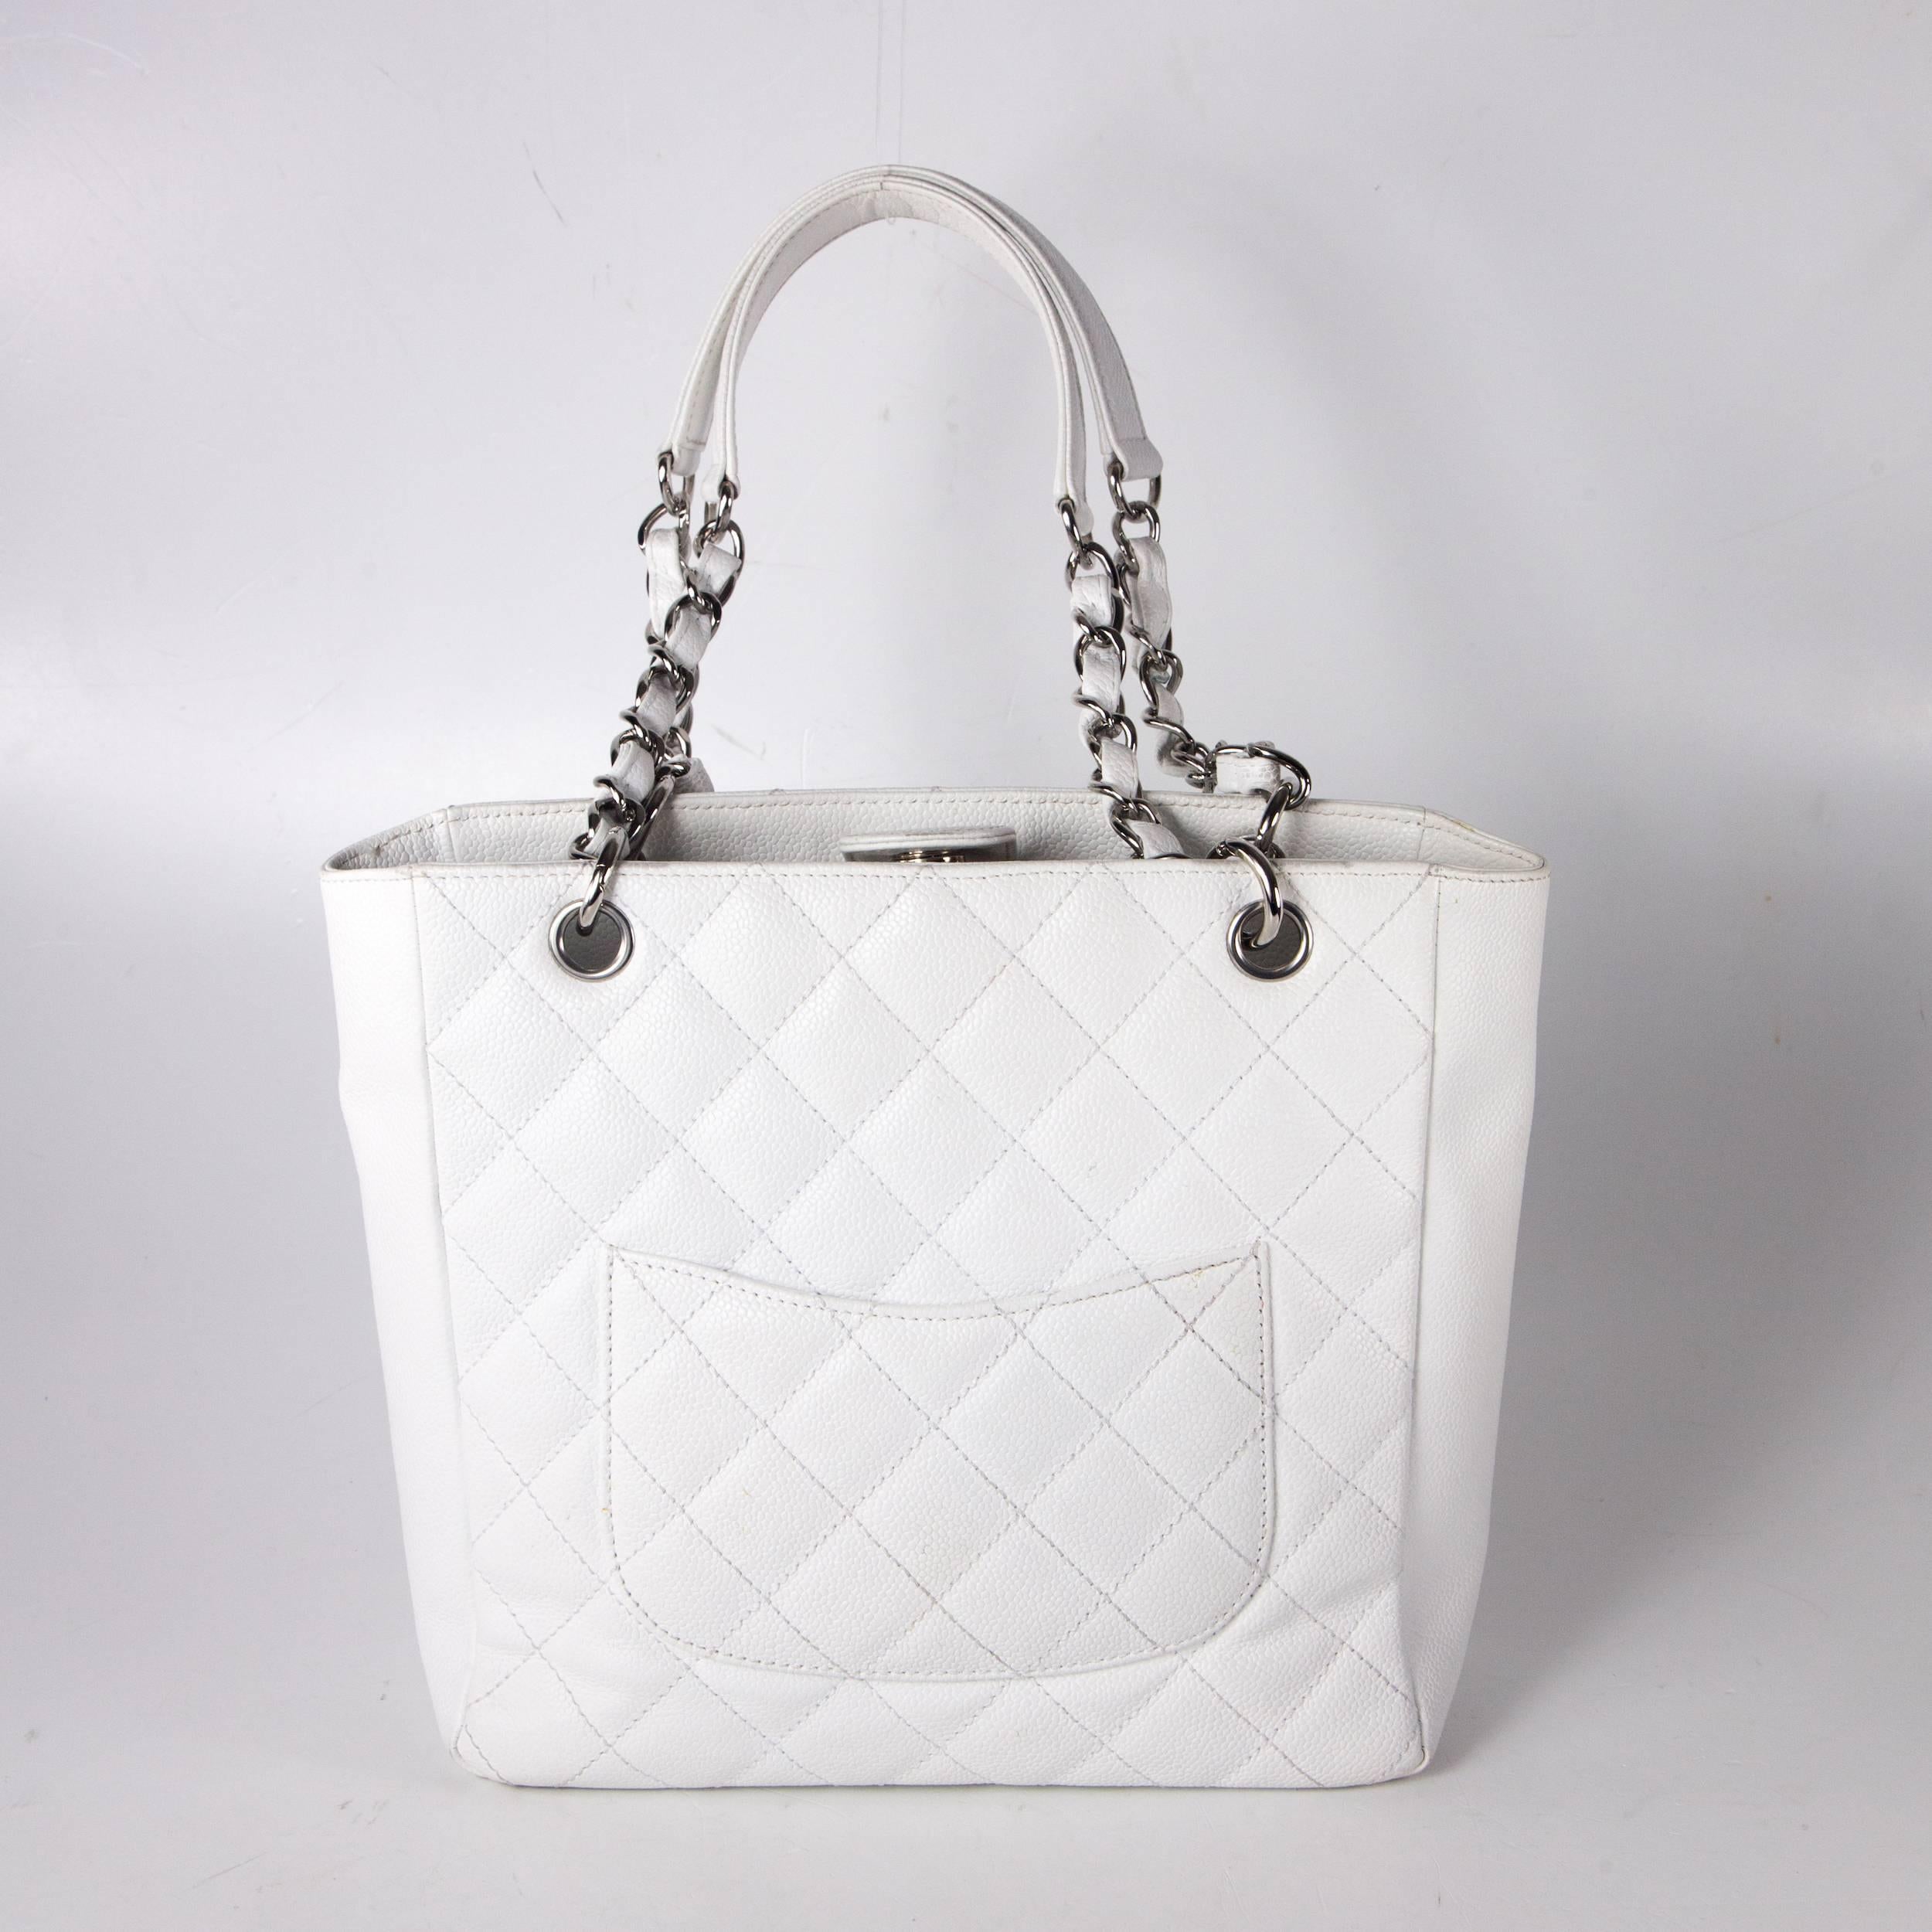 Chanel - Petite Shopping Tote

Color: White

Material: Caviar Leather

------------------------------------------------------------

Details:

- quilted leather

- embroidered cc logo at front

- dual woven chain strap

- magnetic snap closure at